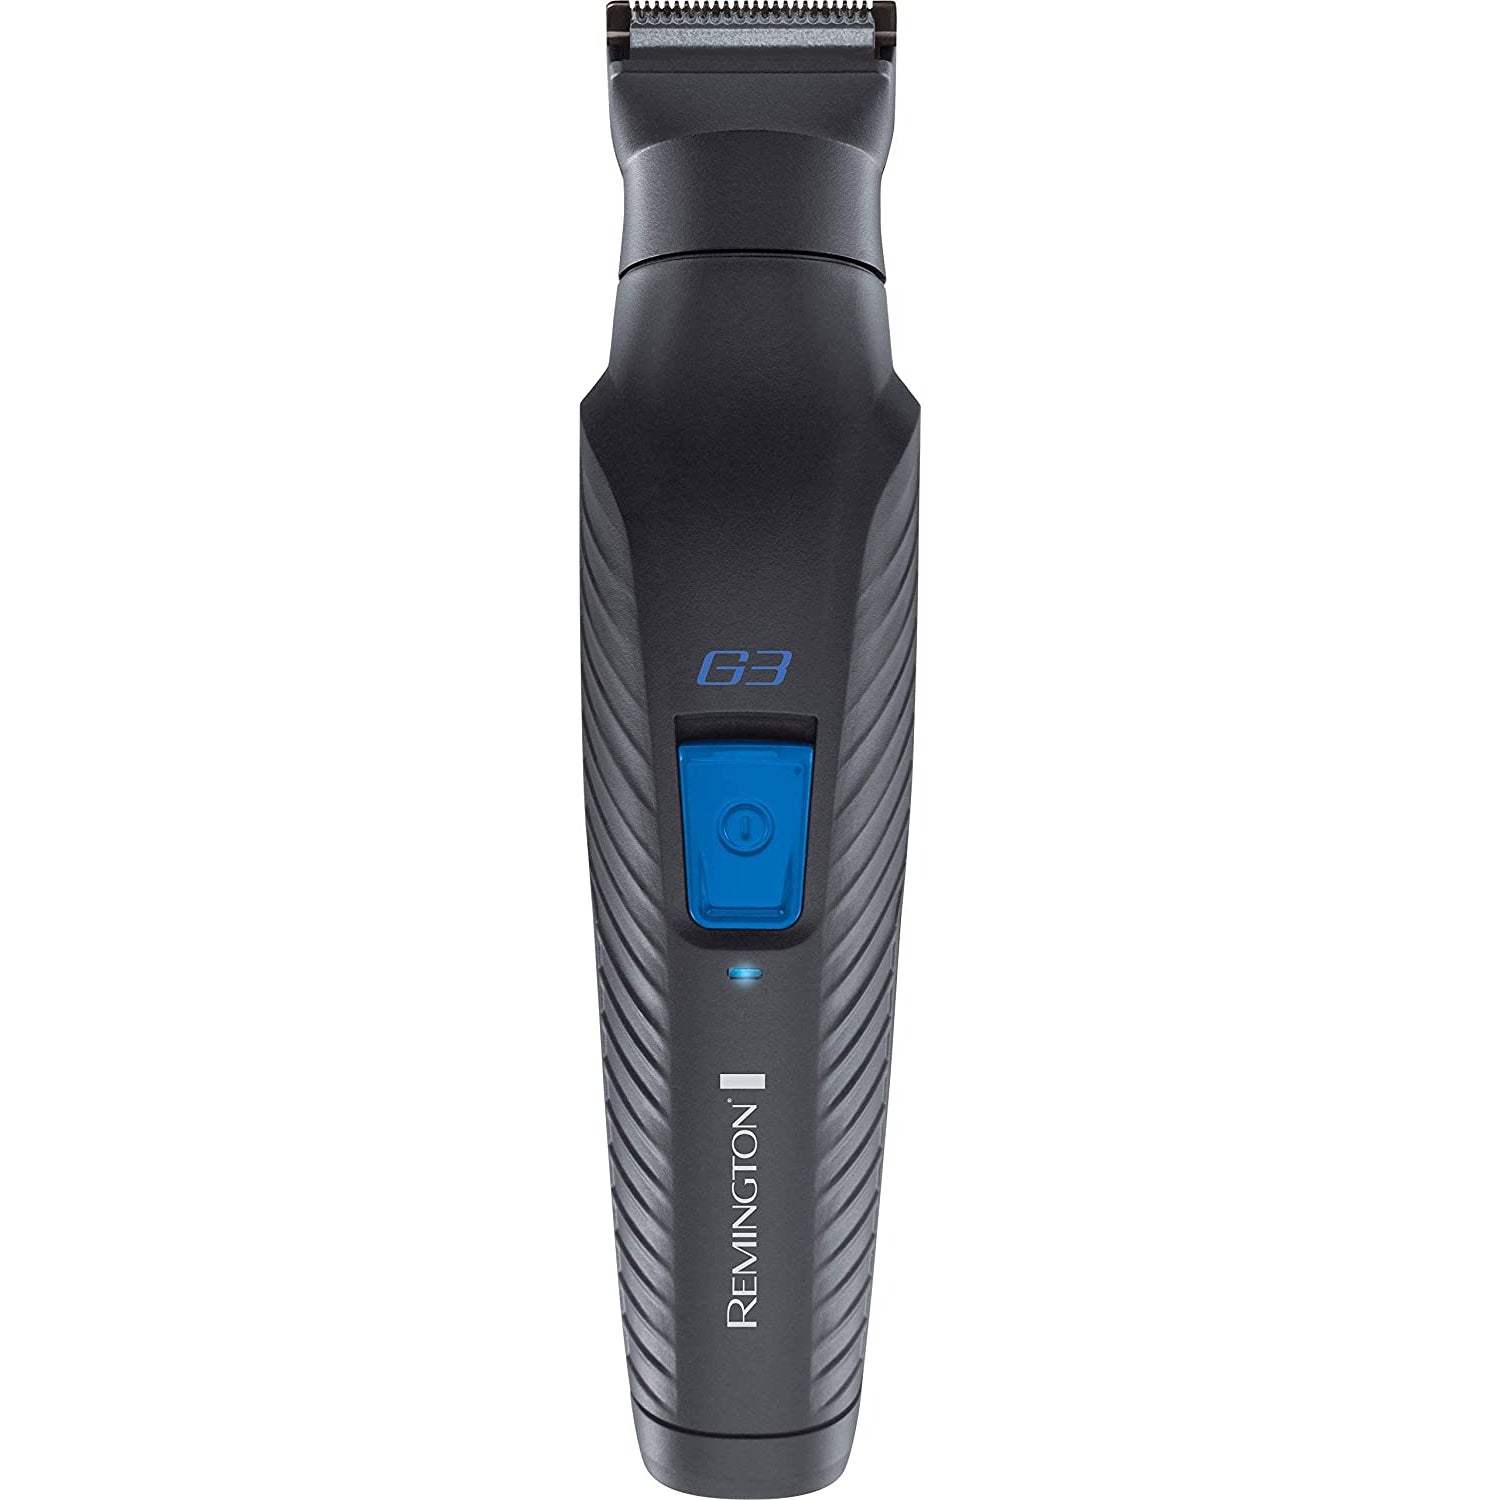 Remington Graphite G3, All-in-One Cordless Electric Trimmer, Body Groomer and Nose Hair Trimmer for Men, PG3000 - Healthxpress.ie